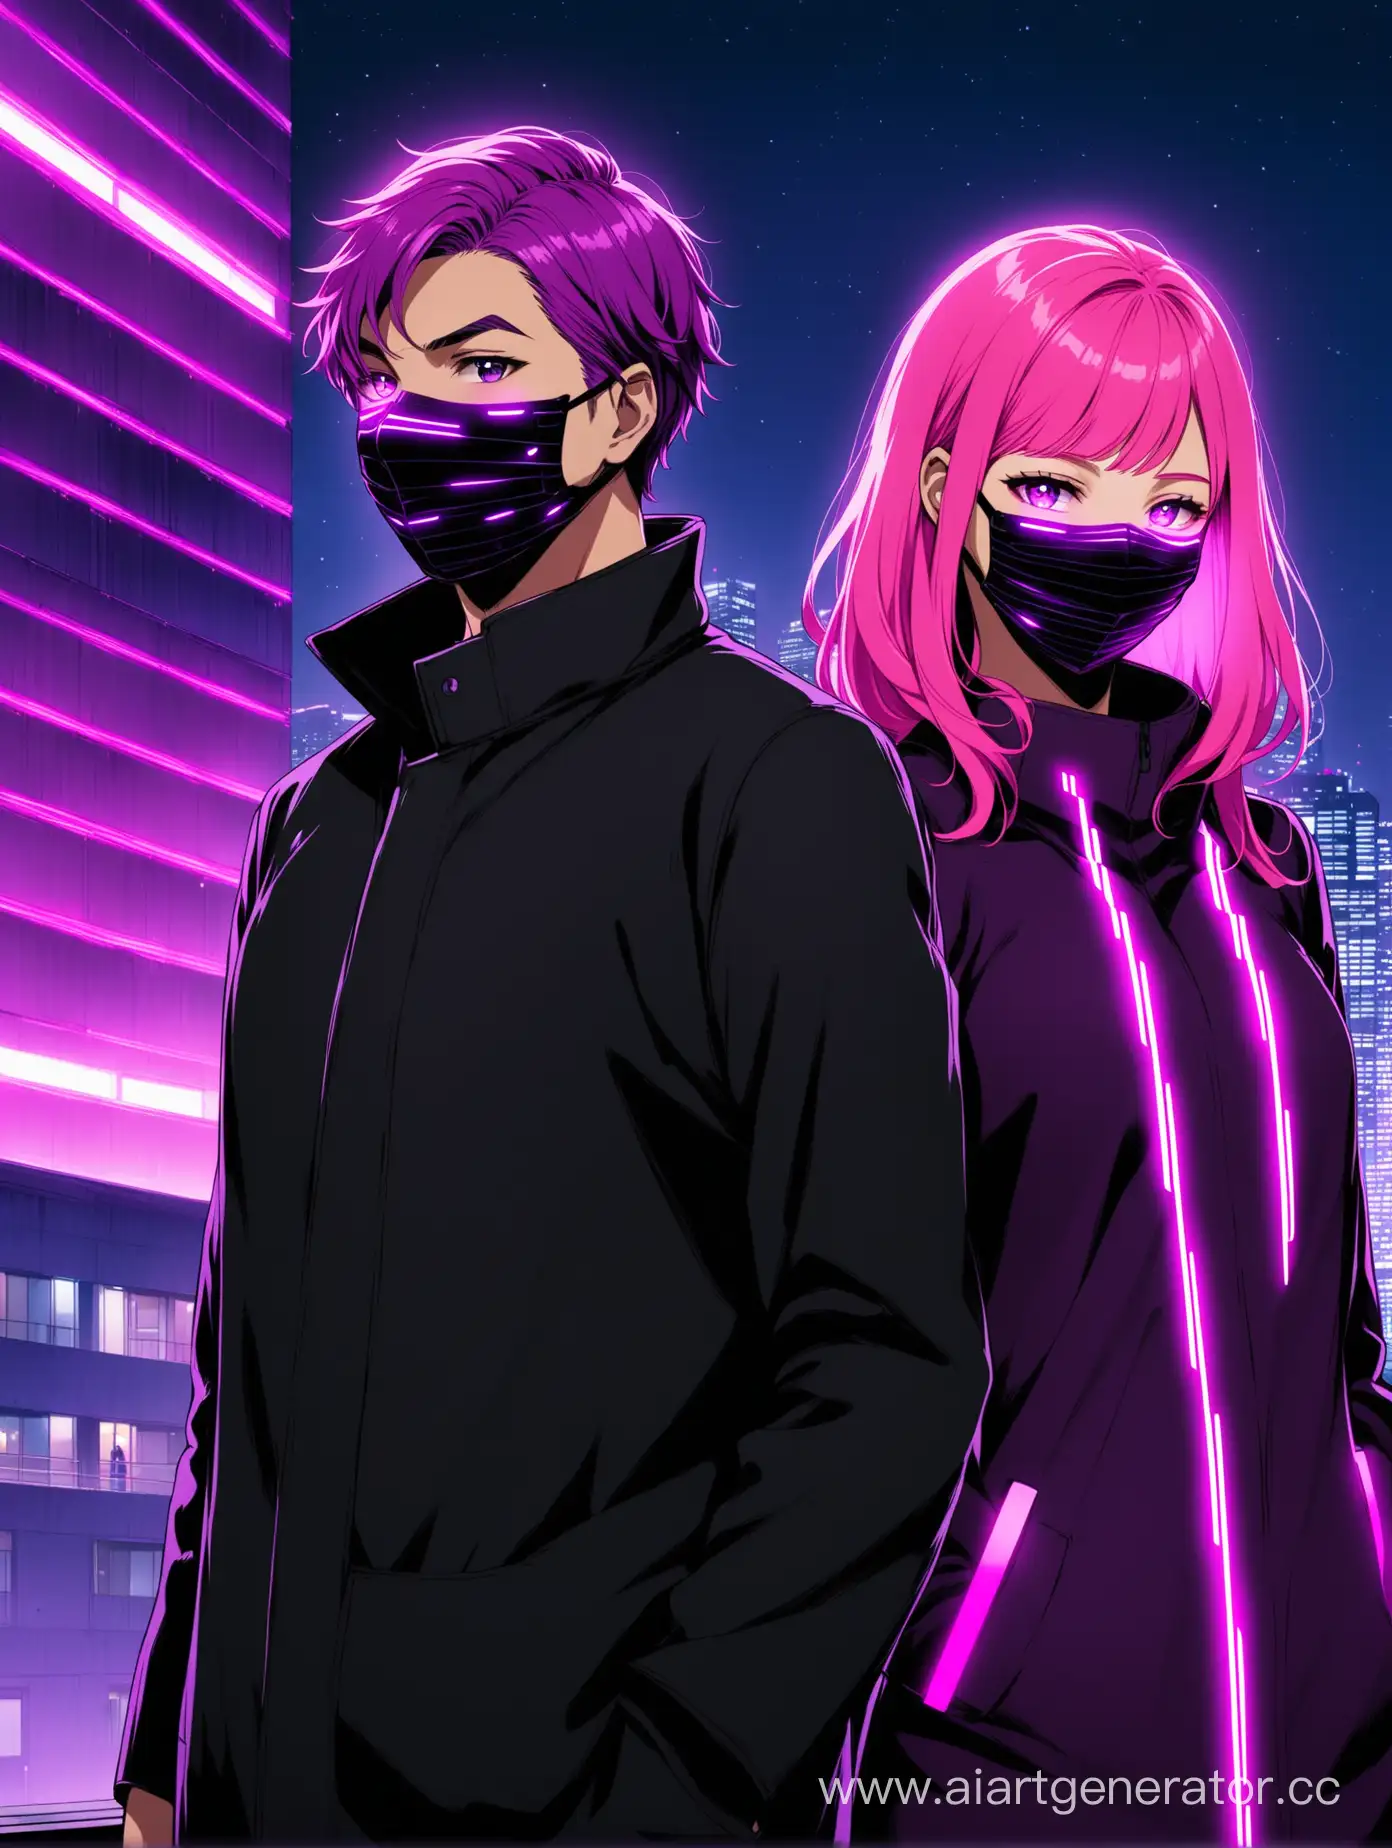 Glowing-PinkHaired-Couple-in-Radiant-Purple-Masks-by-Urban-Building